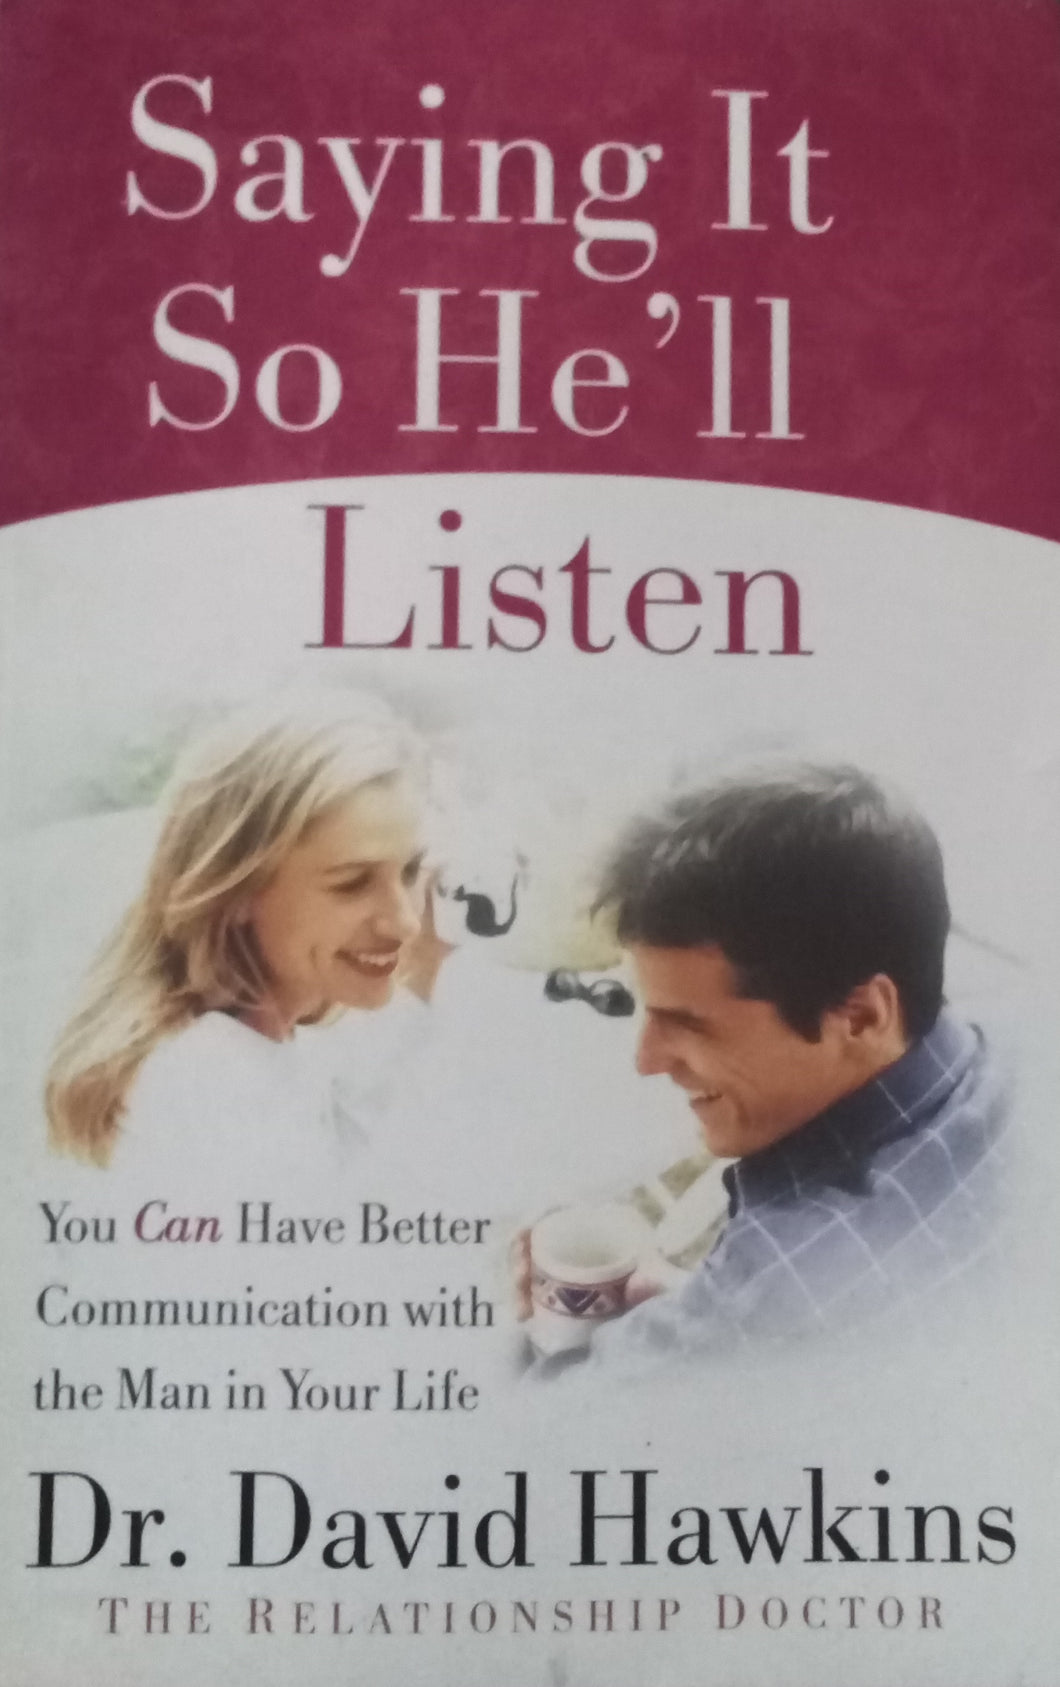 Saying It So He'll Listen by David Hawkins - Books for Less Online Bookstore